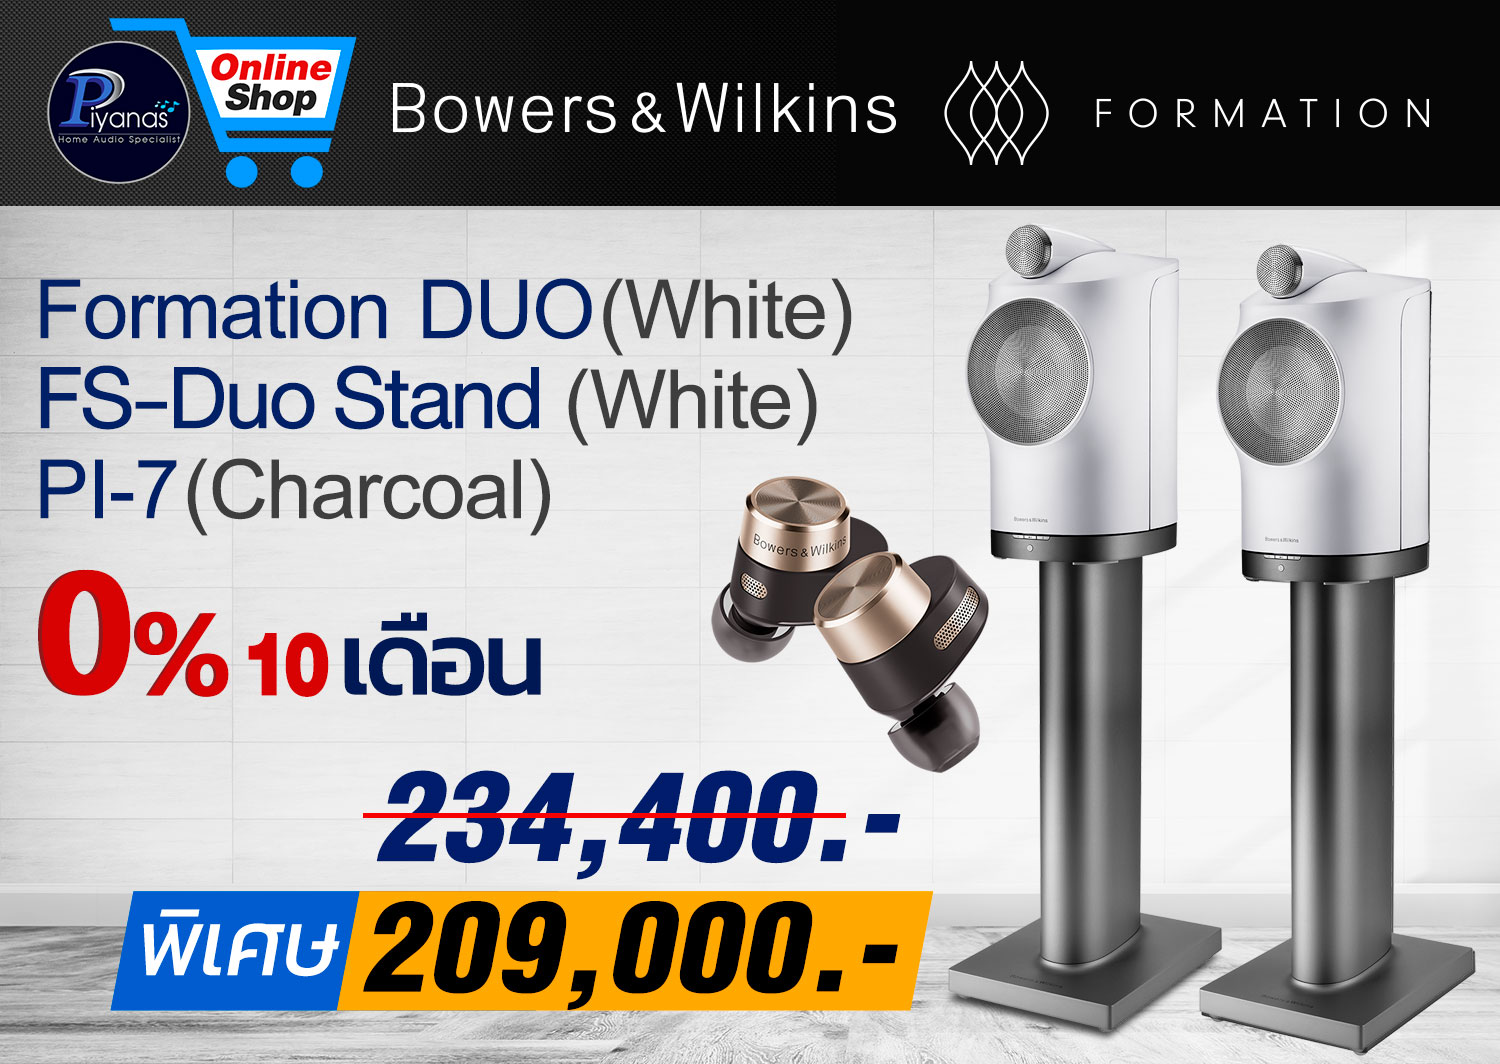 Formation DUO (White)
FS-Duo Stand (White) PI-7 (Charcoal)